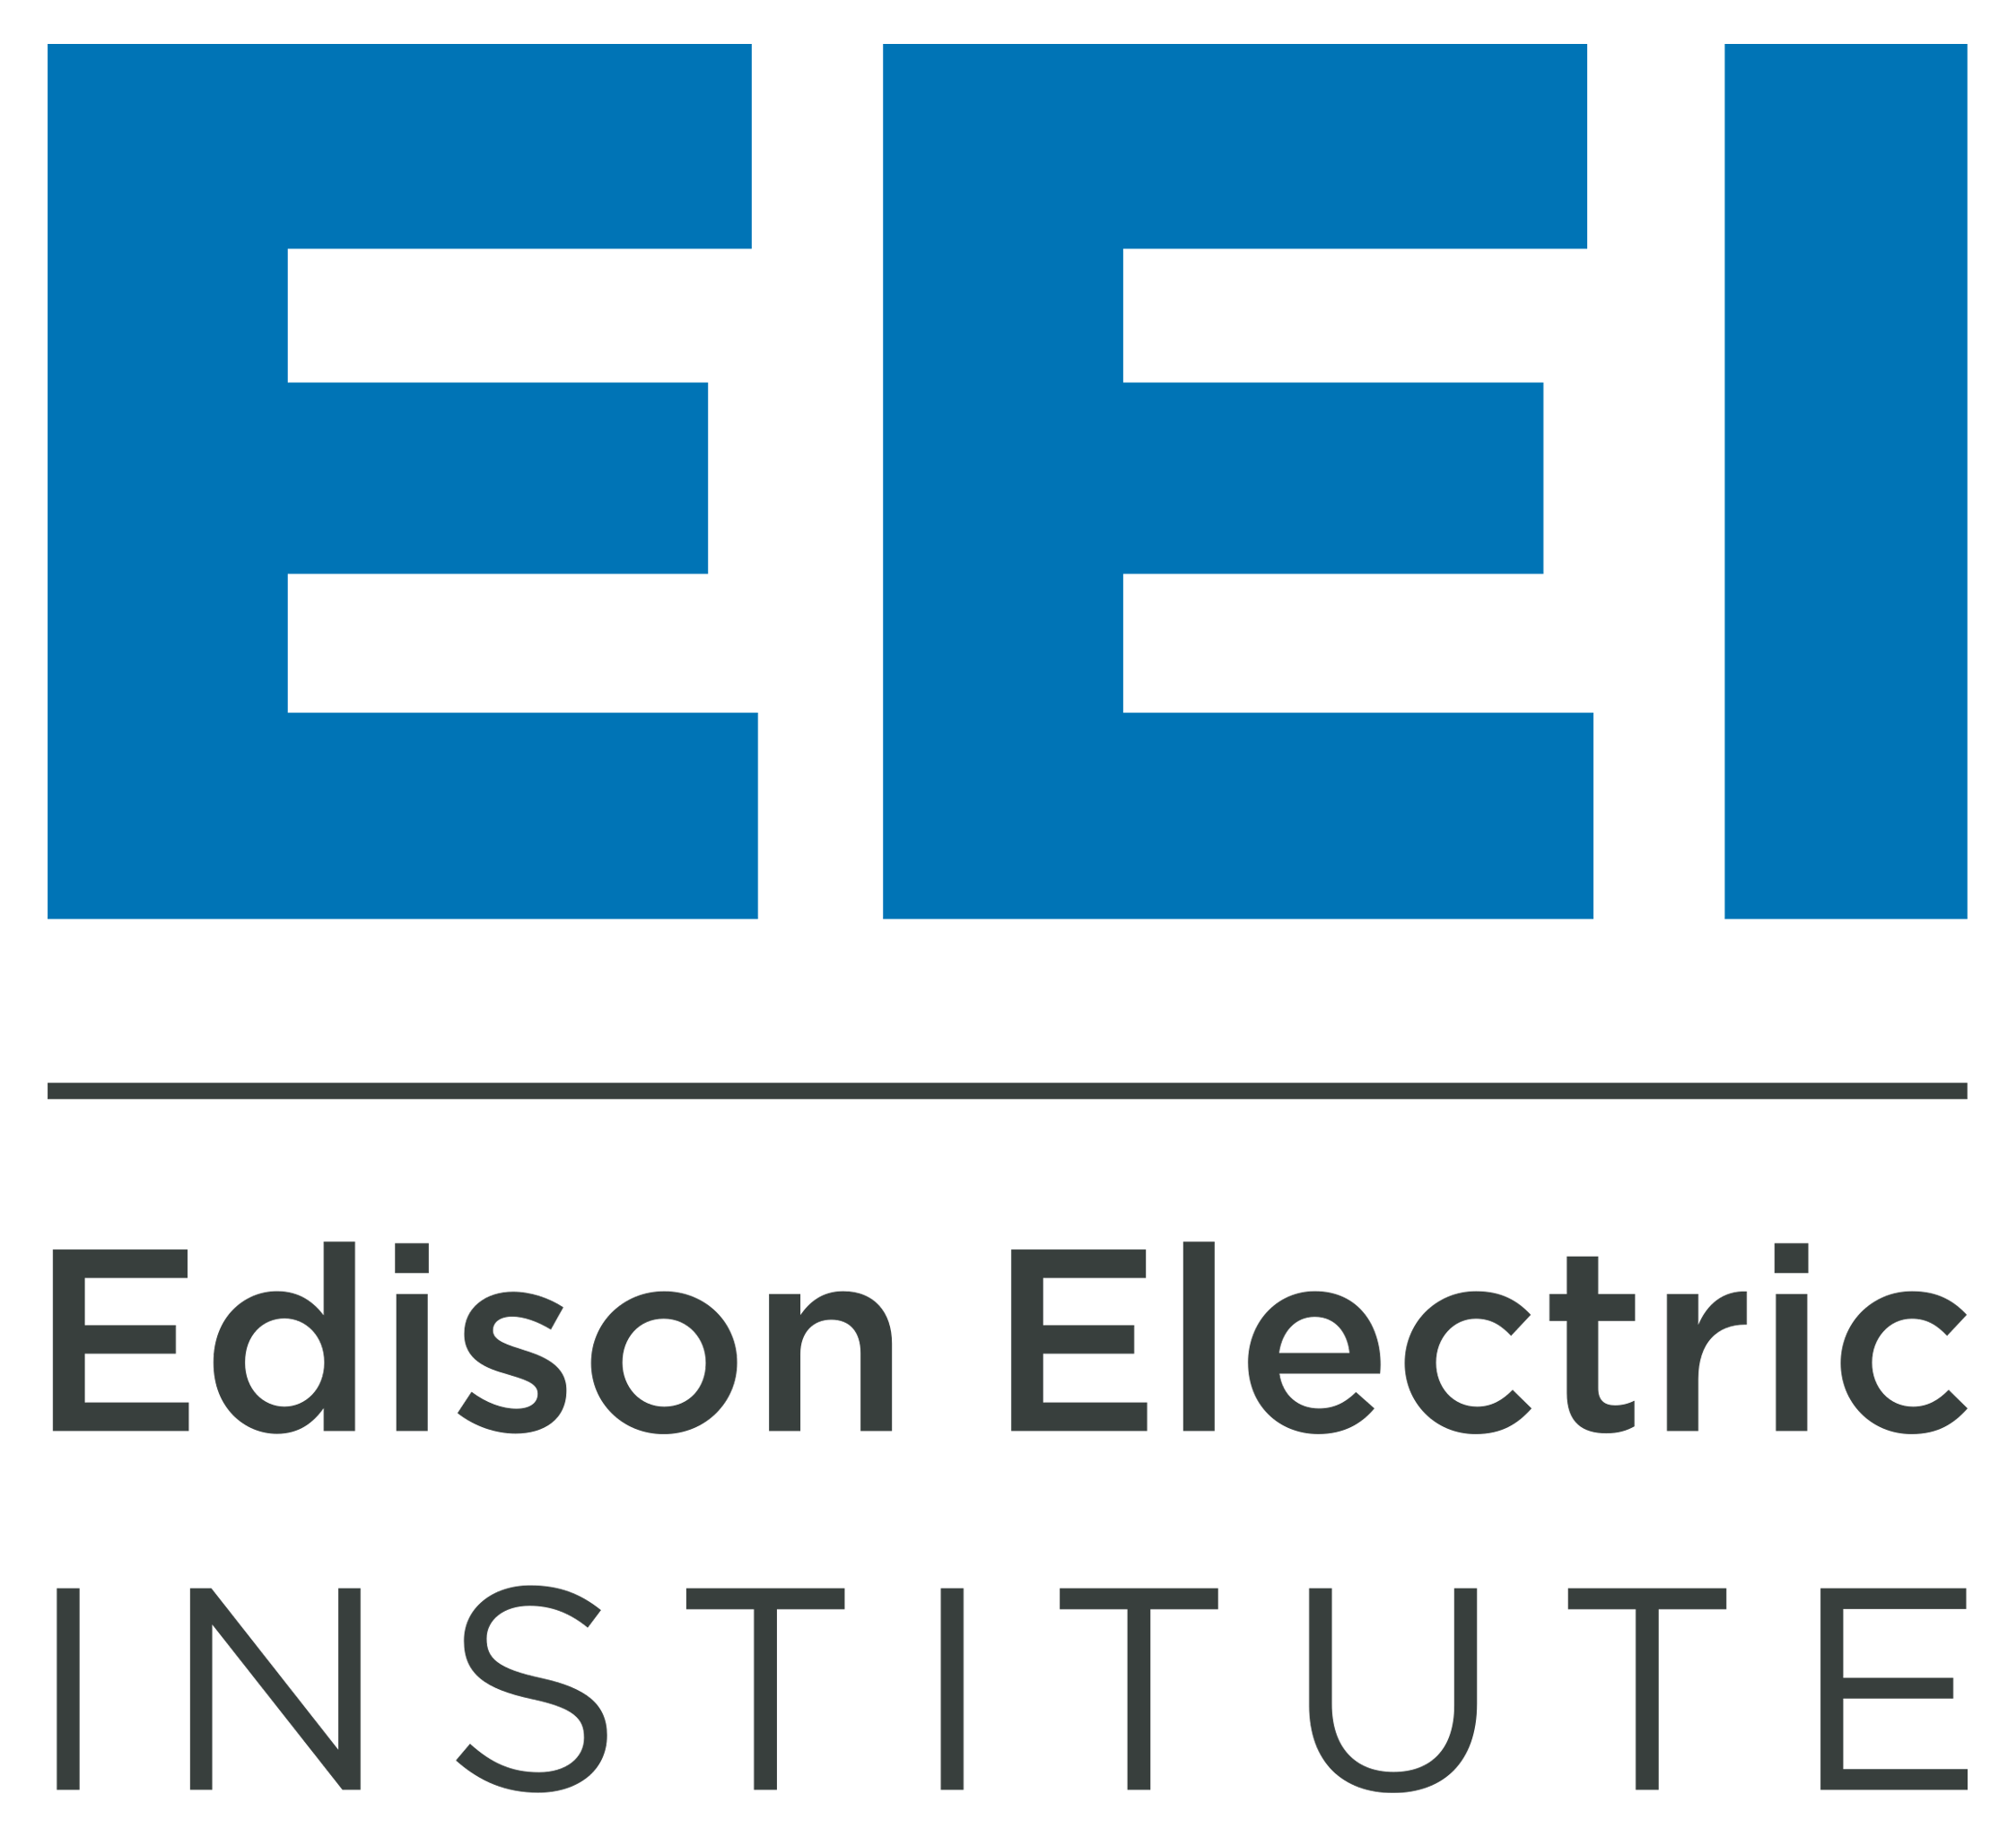 Edison Electric Institute Electrical Safety Foundation